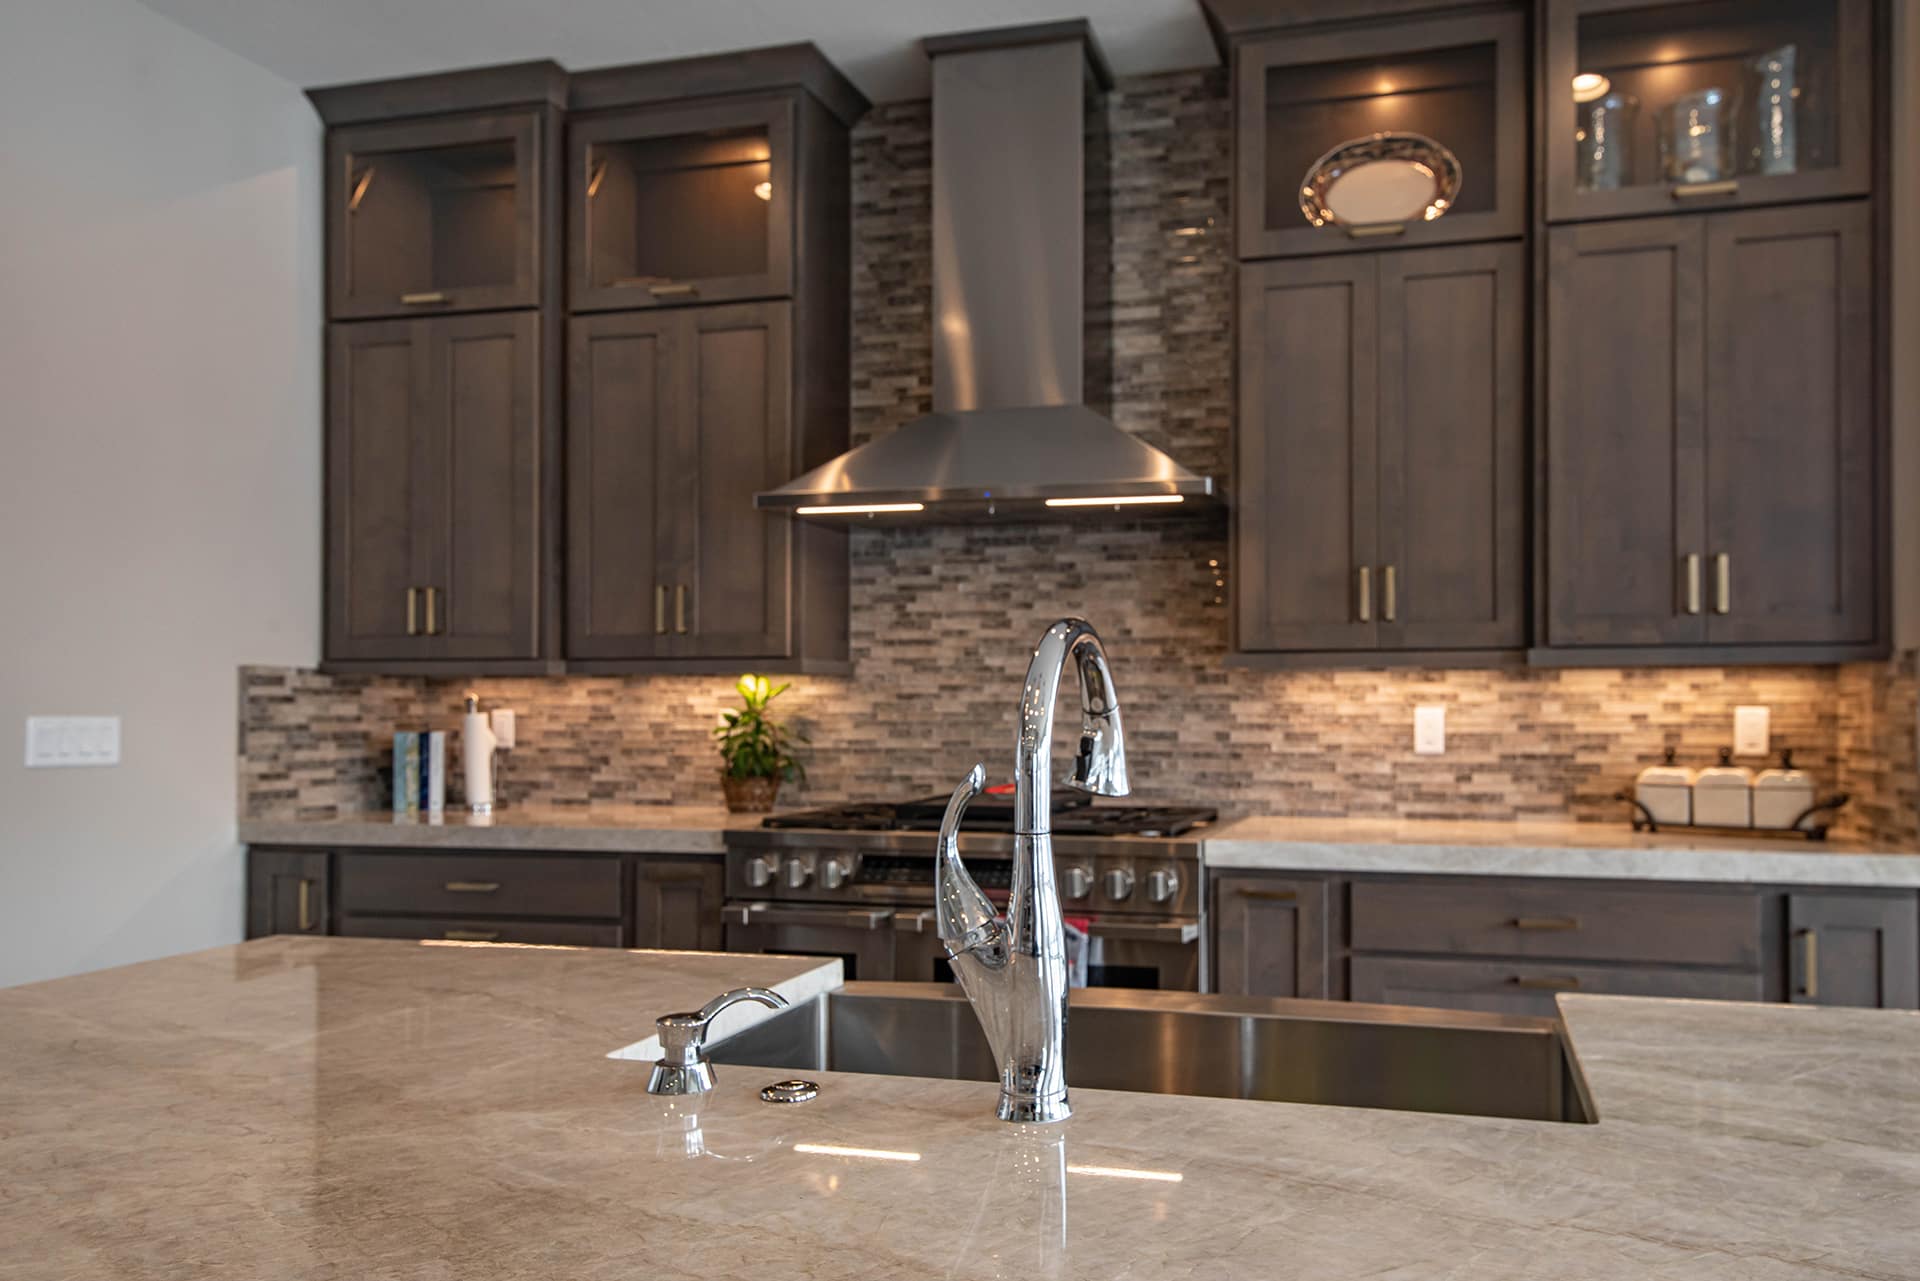 Kitchen Cabinets and Countertops - West Haven, UT